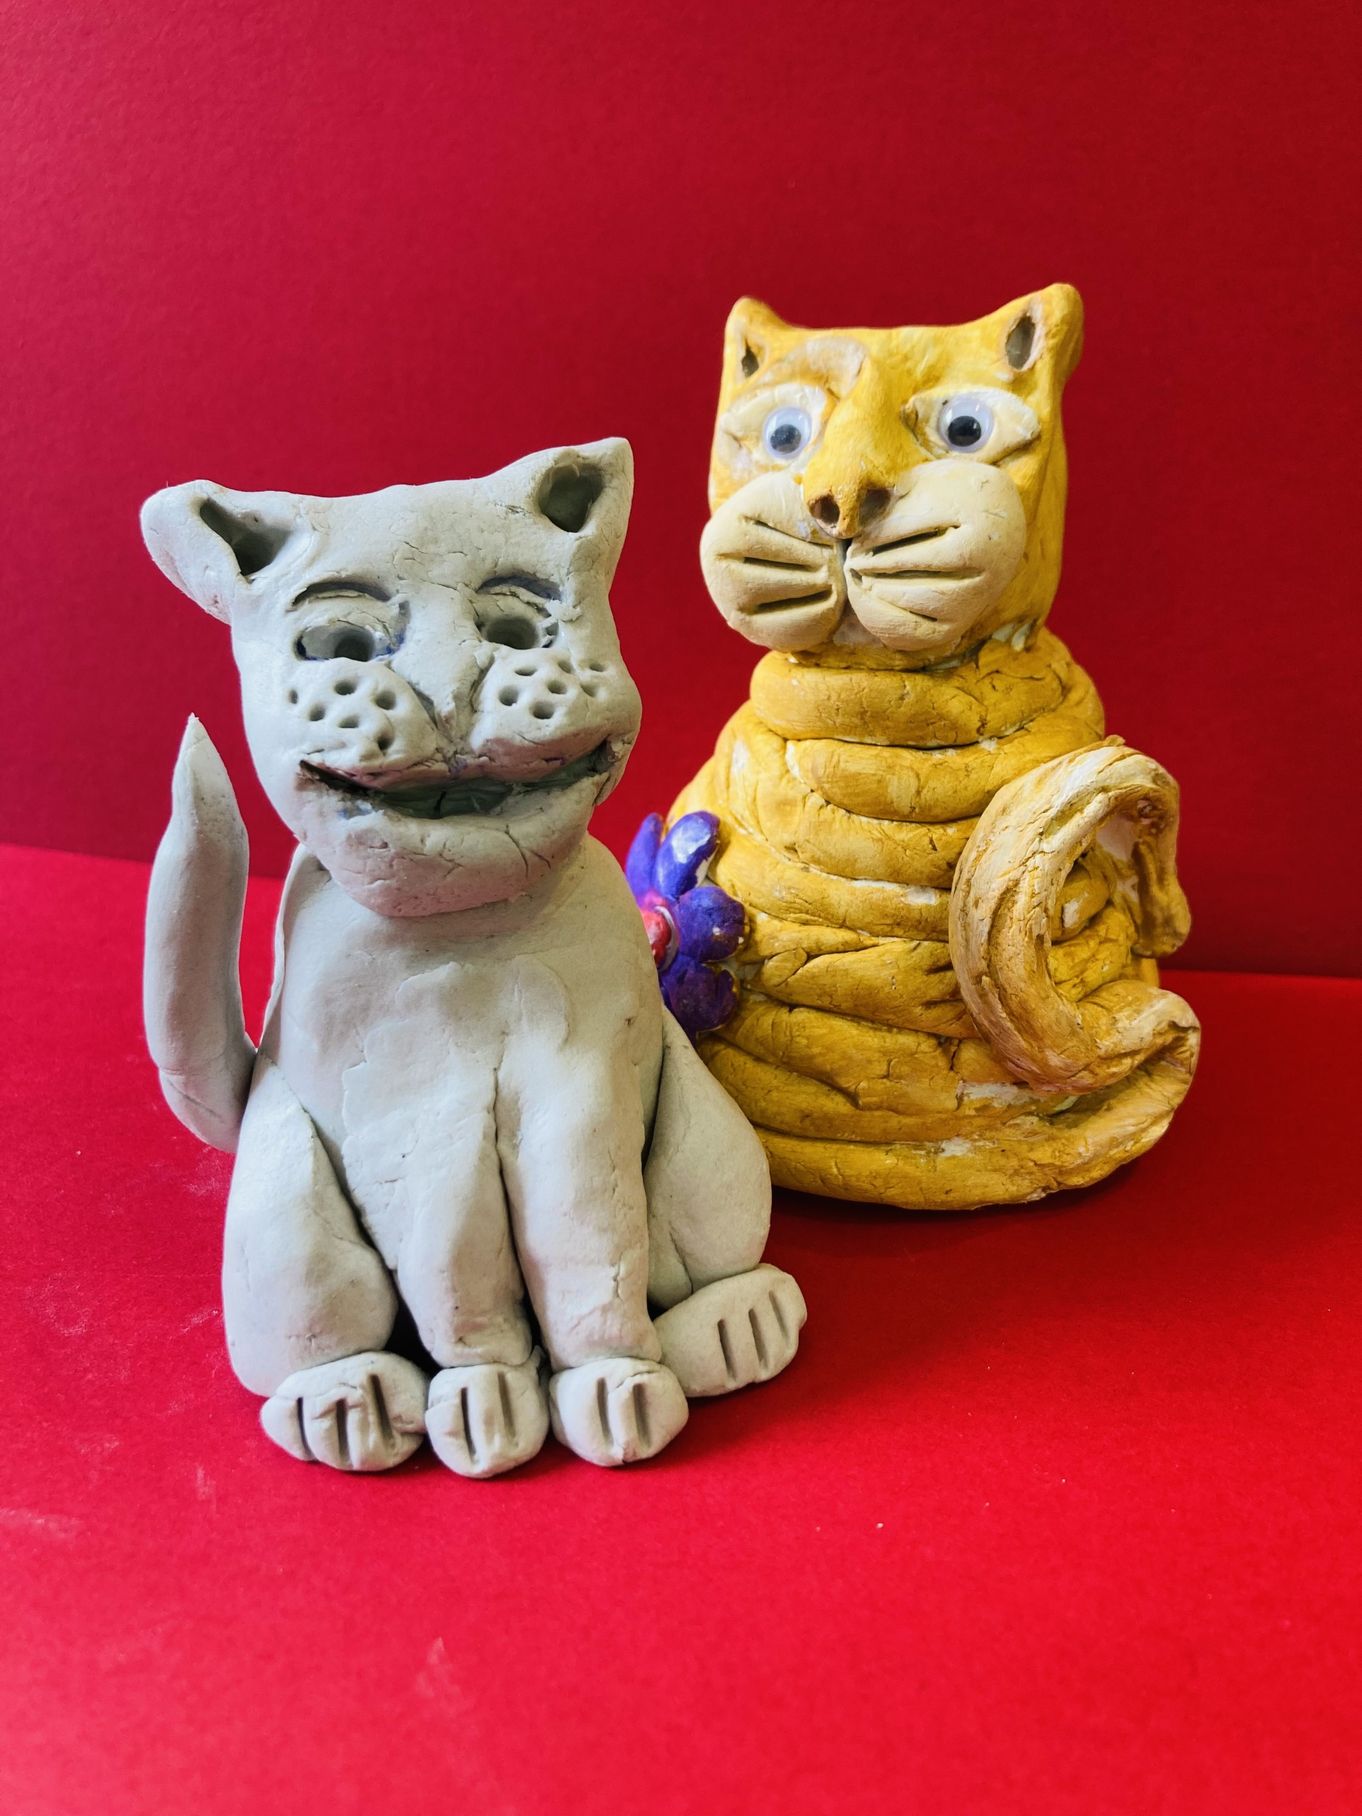 Summer Family Crafts - Clay Cats and other animals